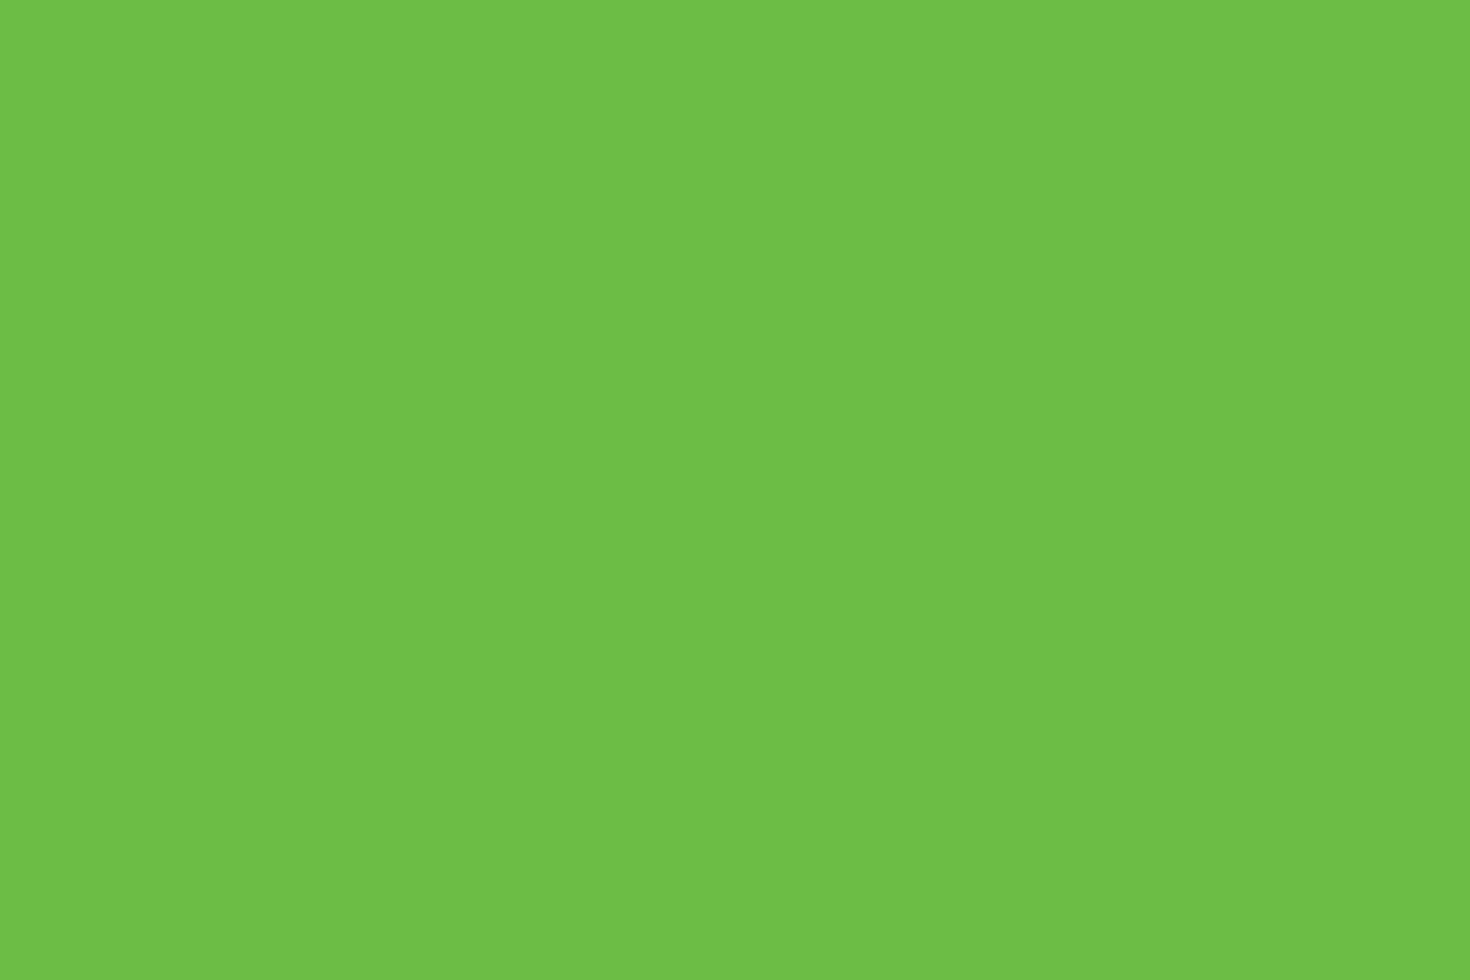 Green screen chroma key background Template for your design vector